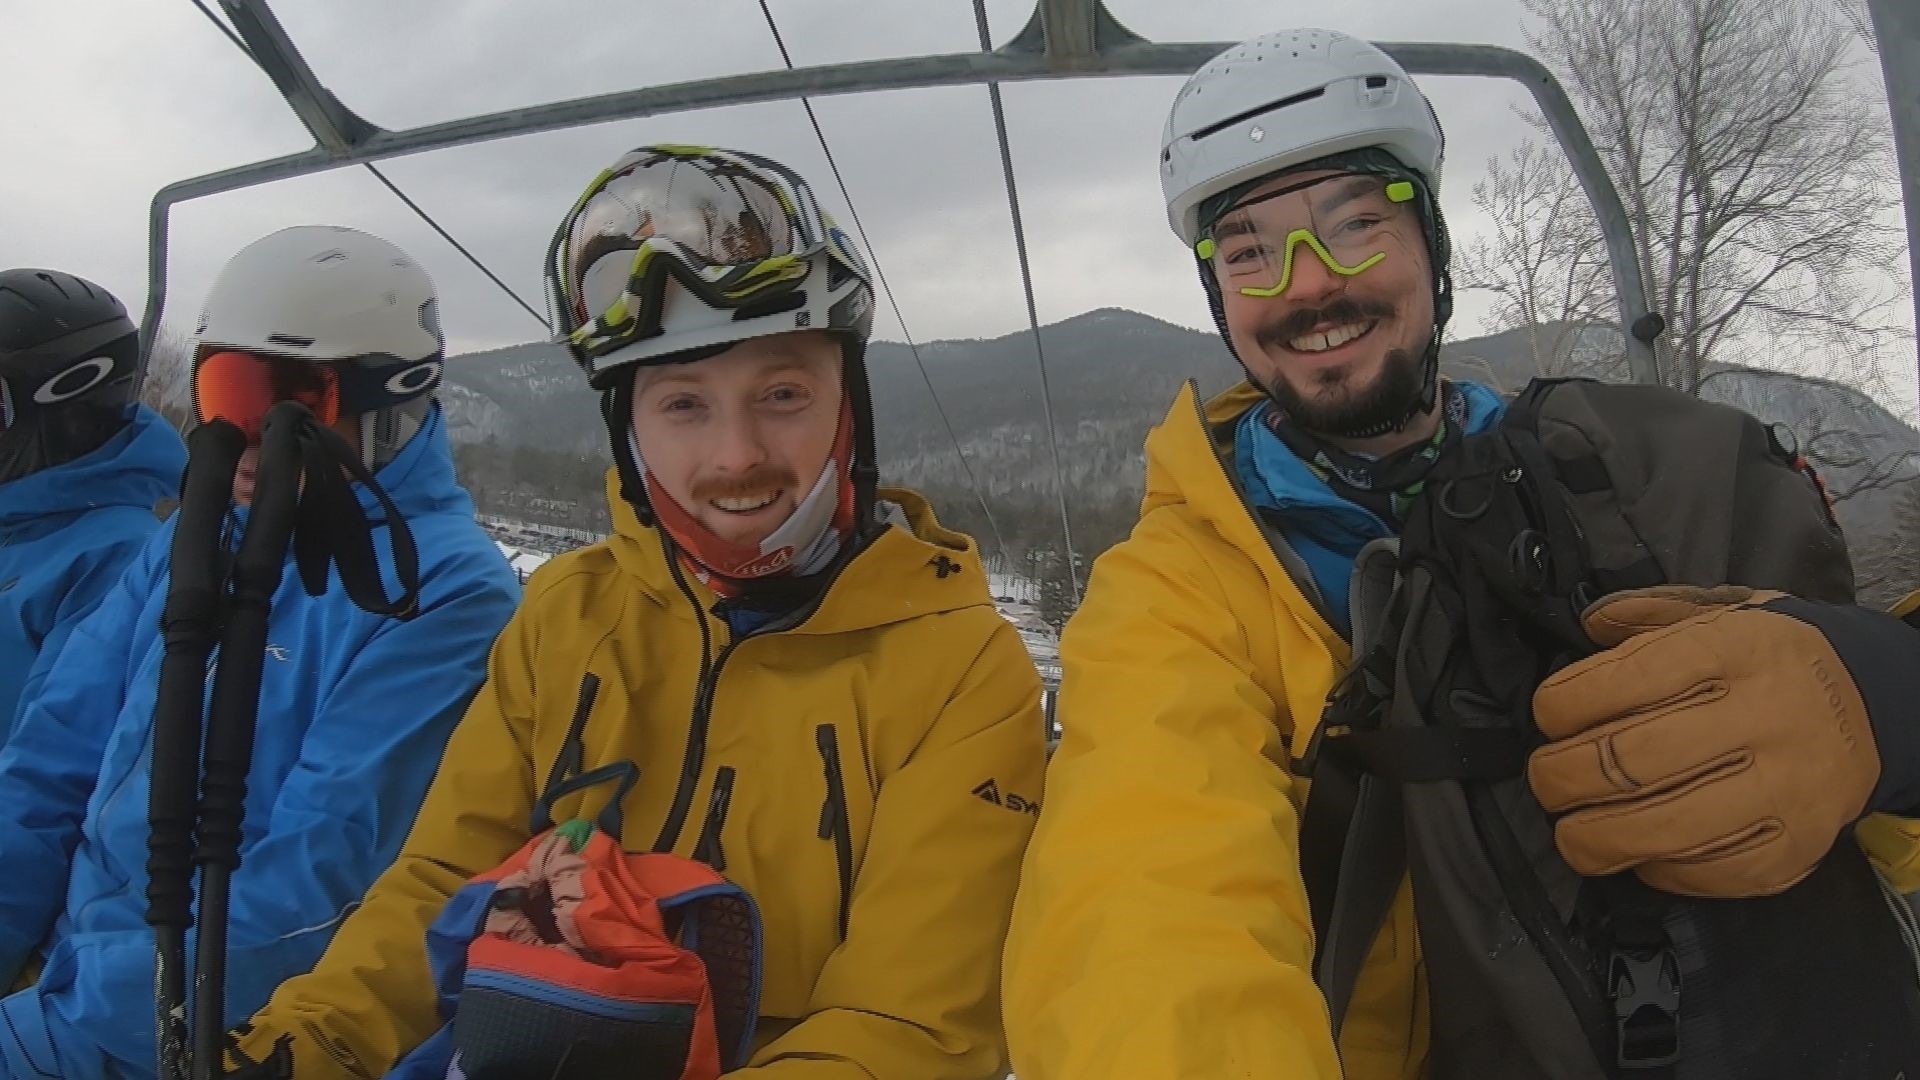 Ryan McClintock has been skiing with his friend Grant Erickson since 2004.